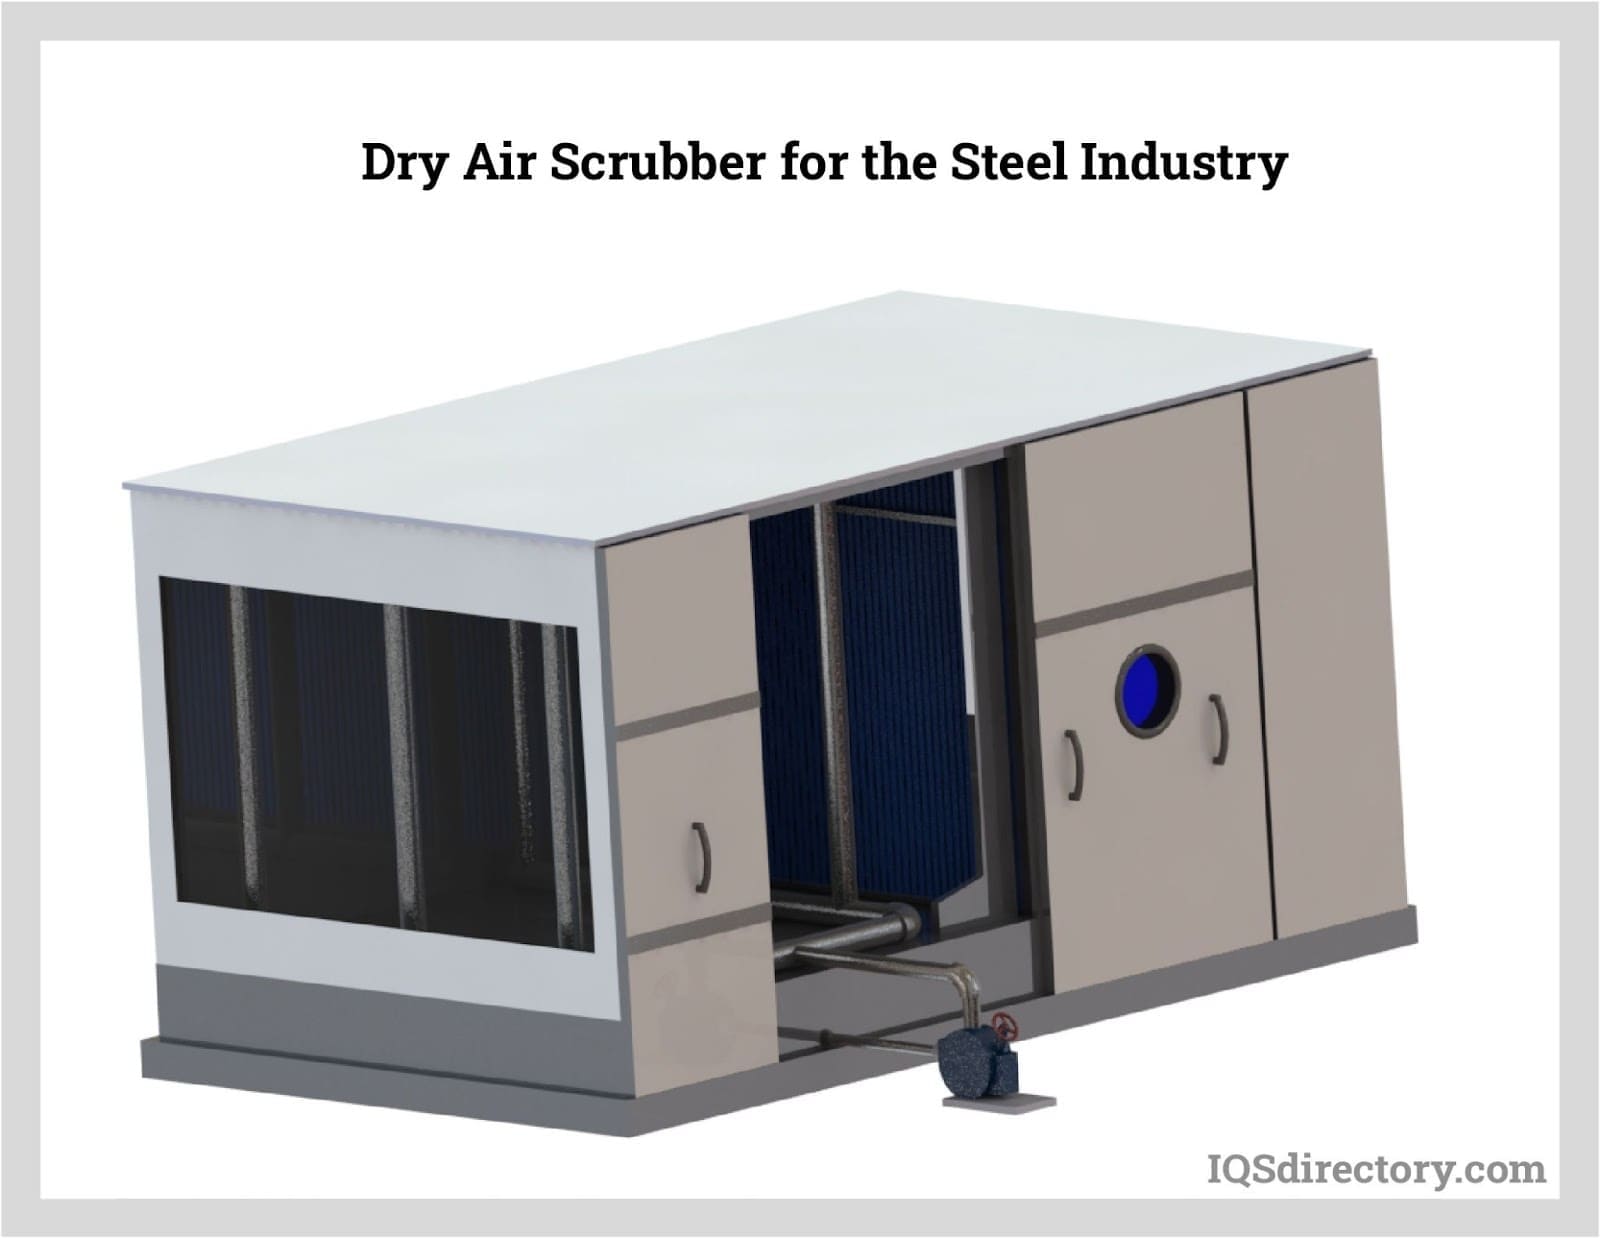 Dry Air Scrubber for the Steel Industry